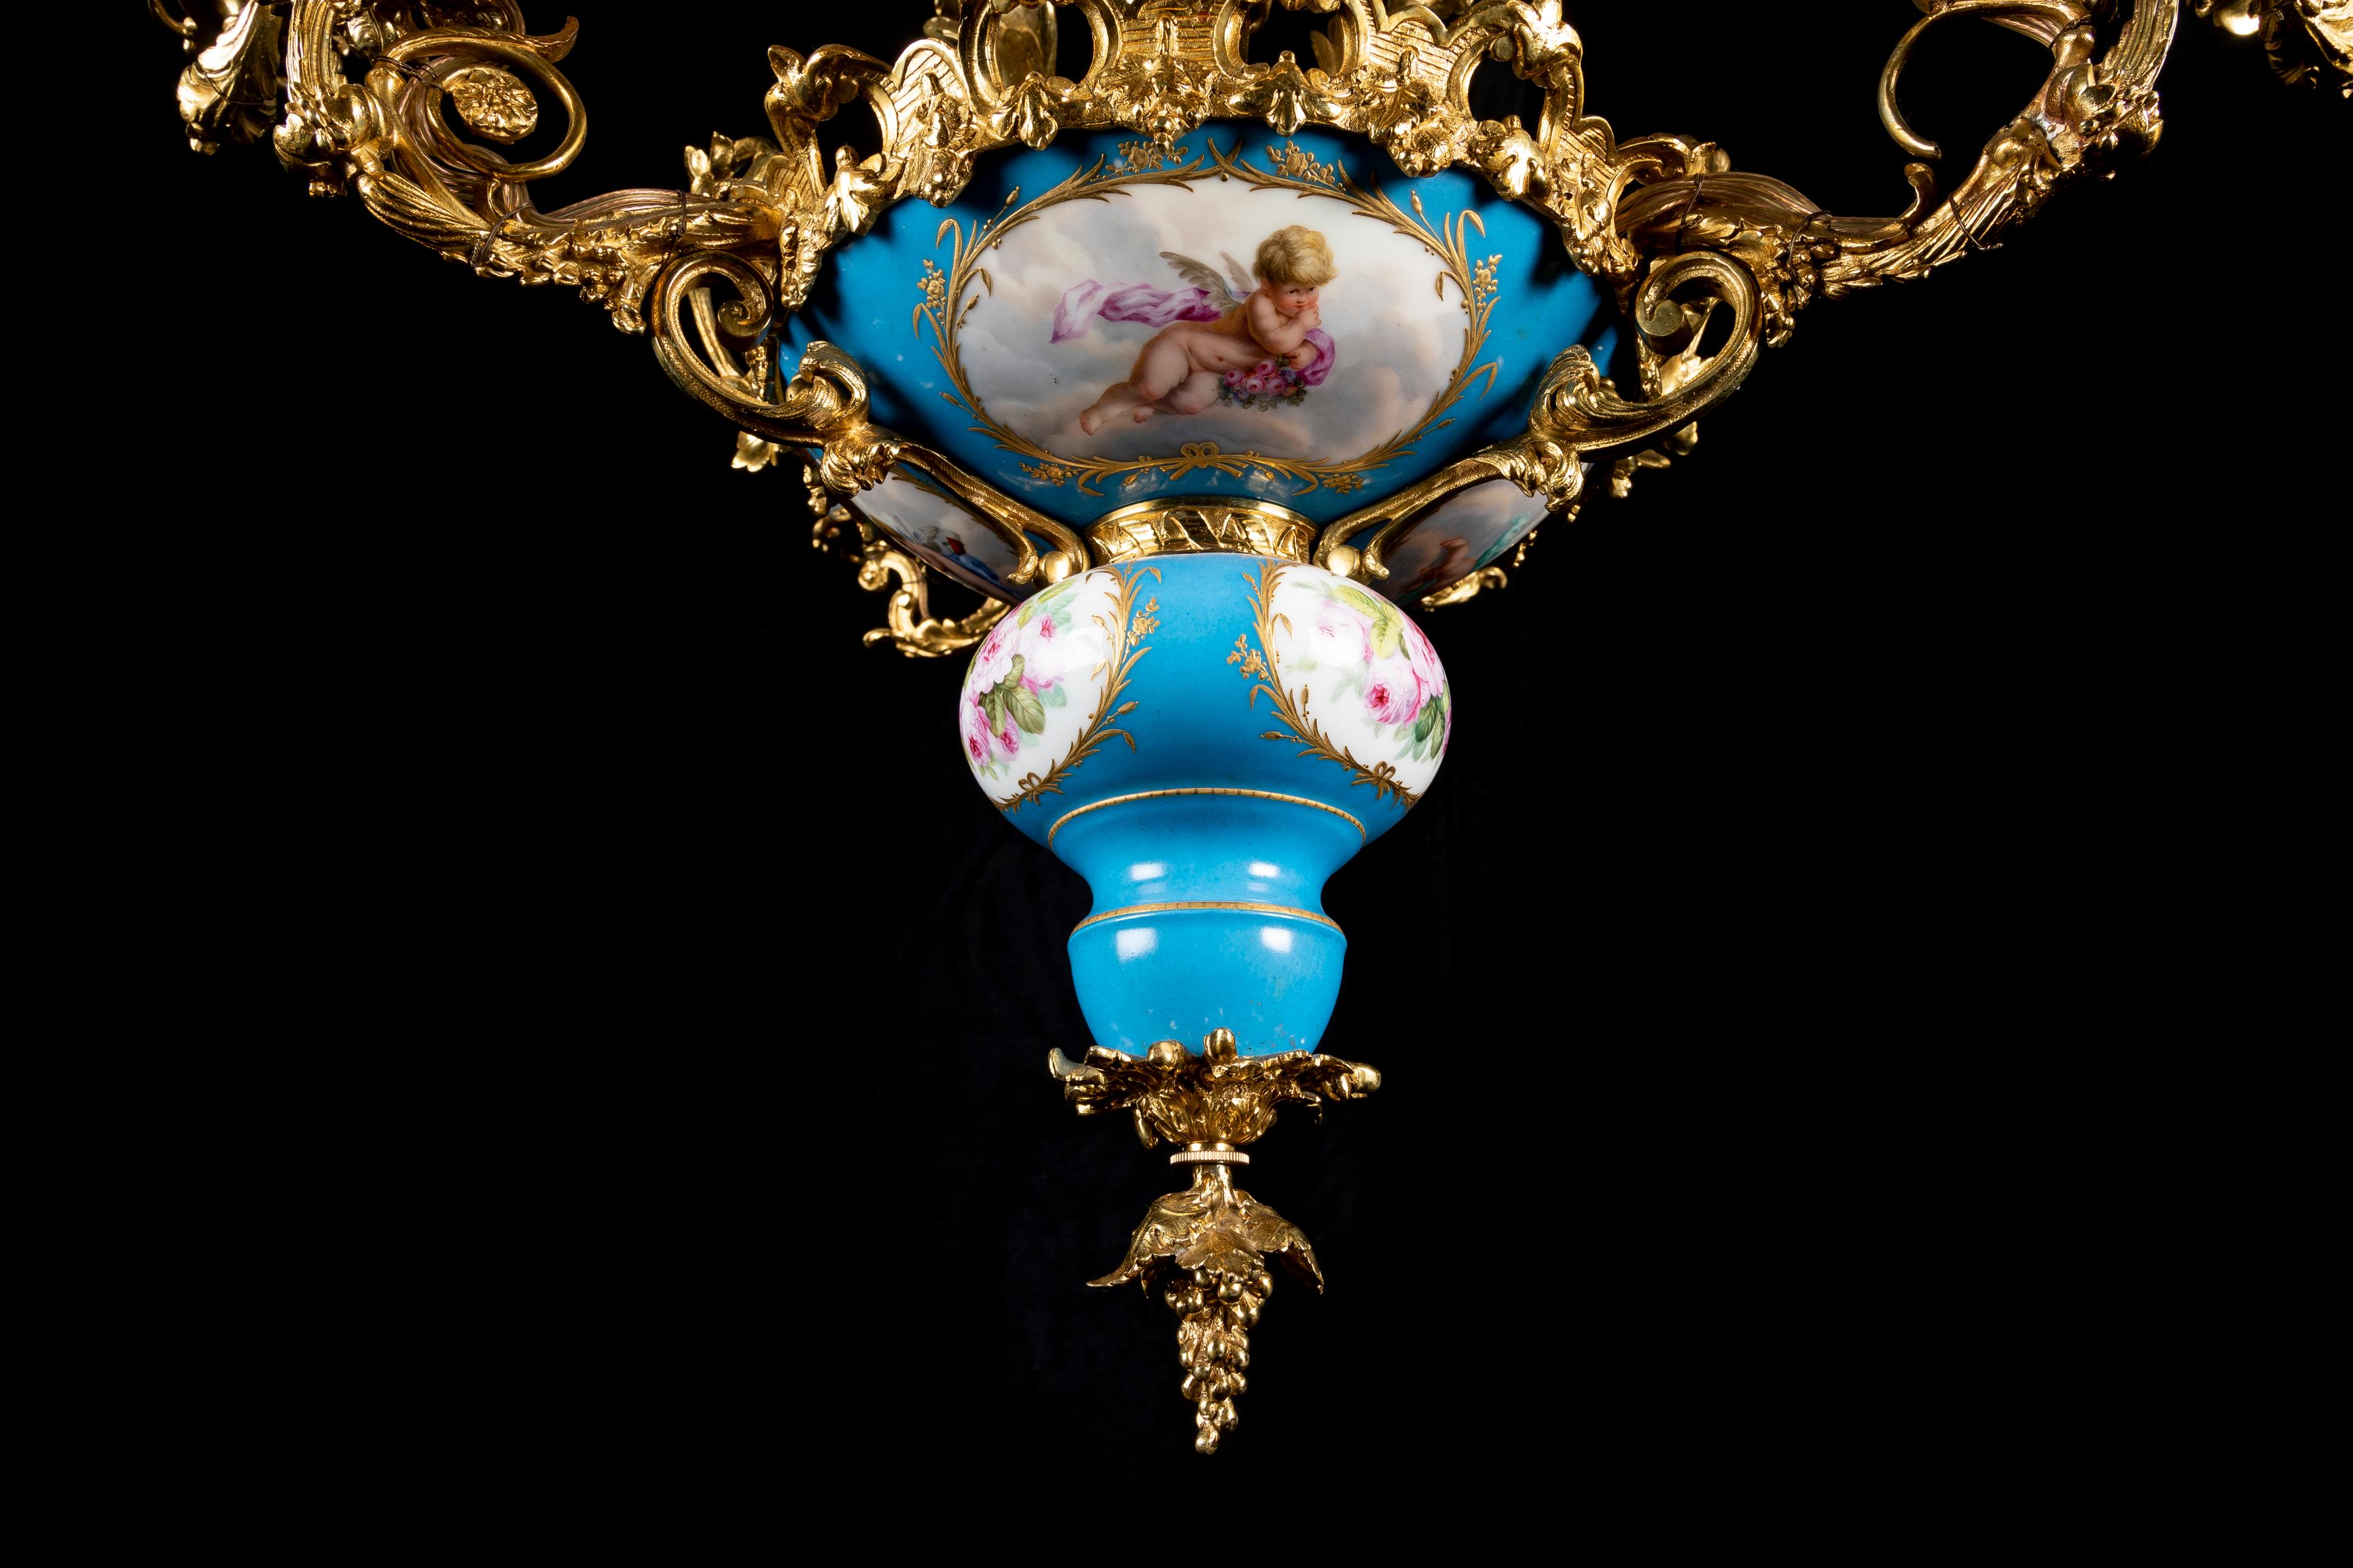 Antique French Louis XVI Style Sevres Porcelain and Gilt Bronze Chandelier For Sale 4